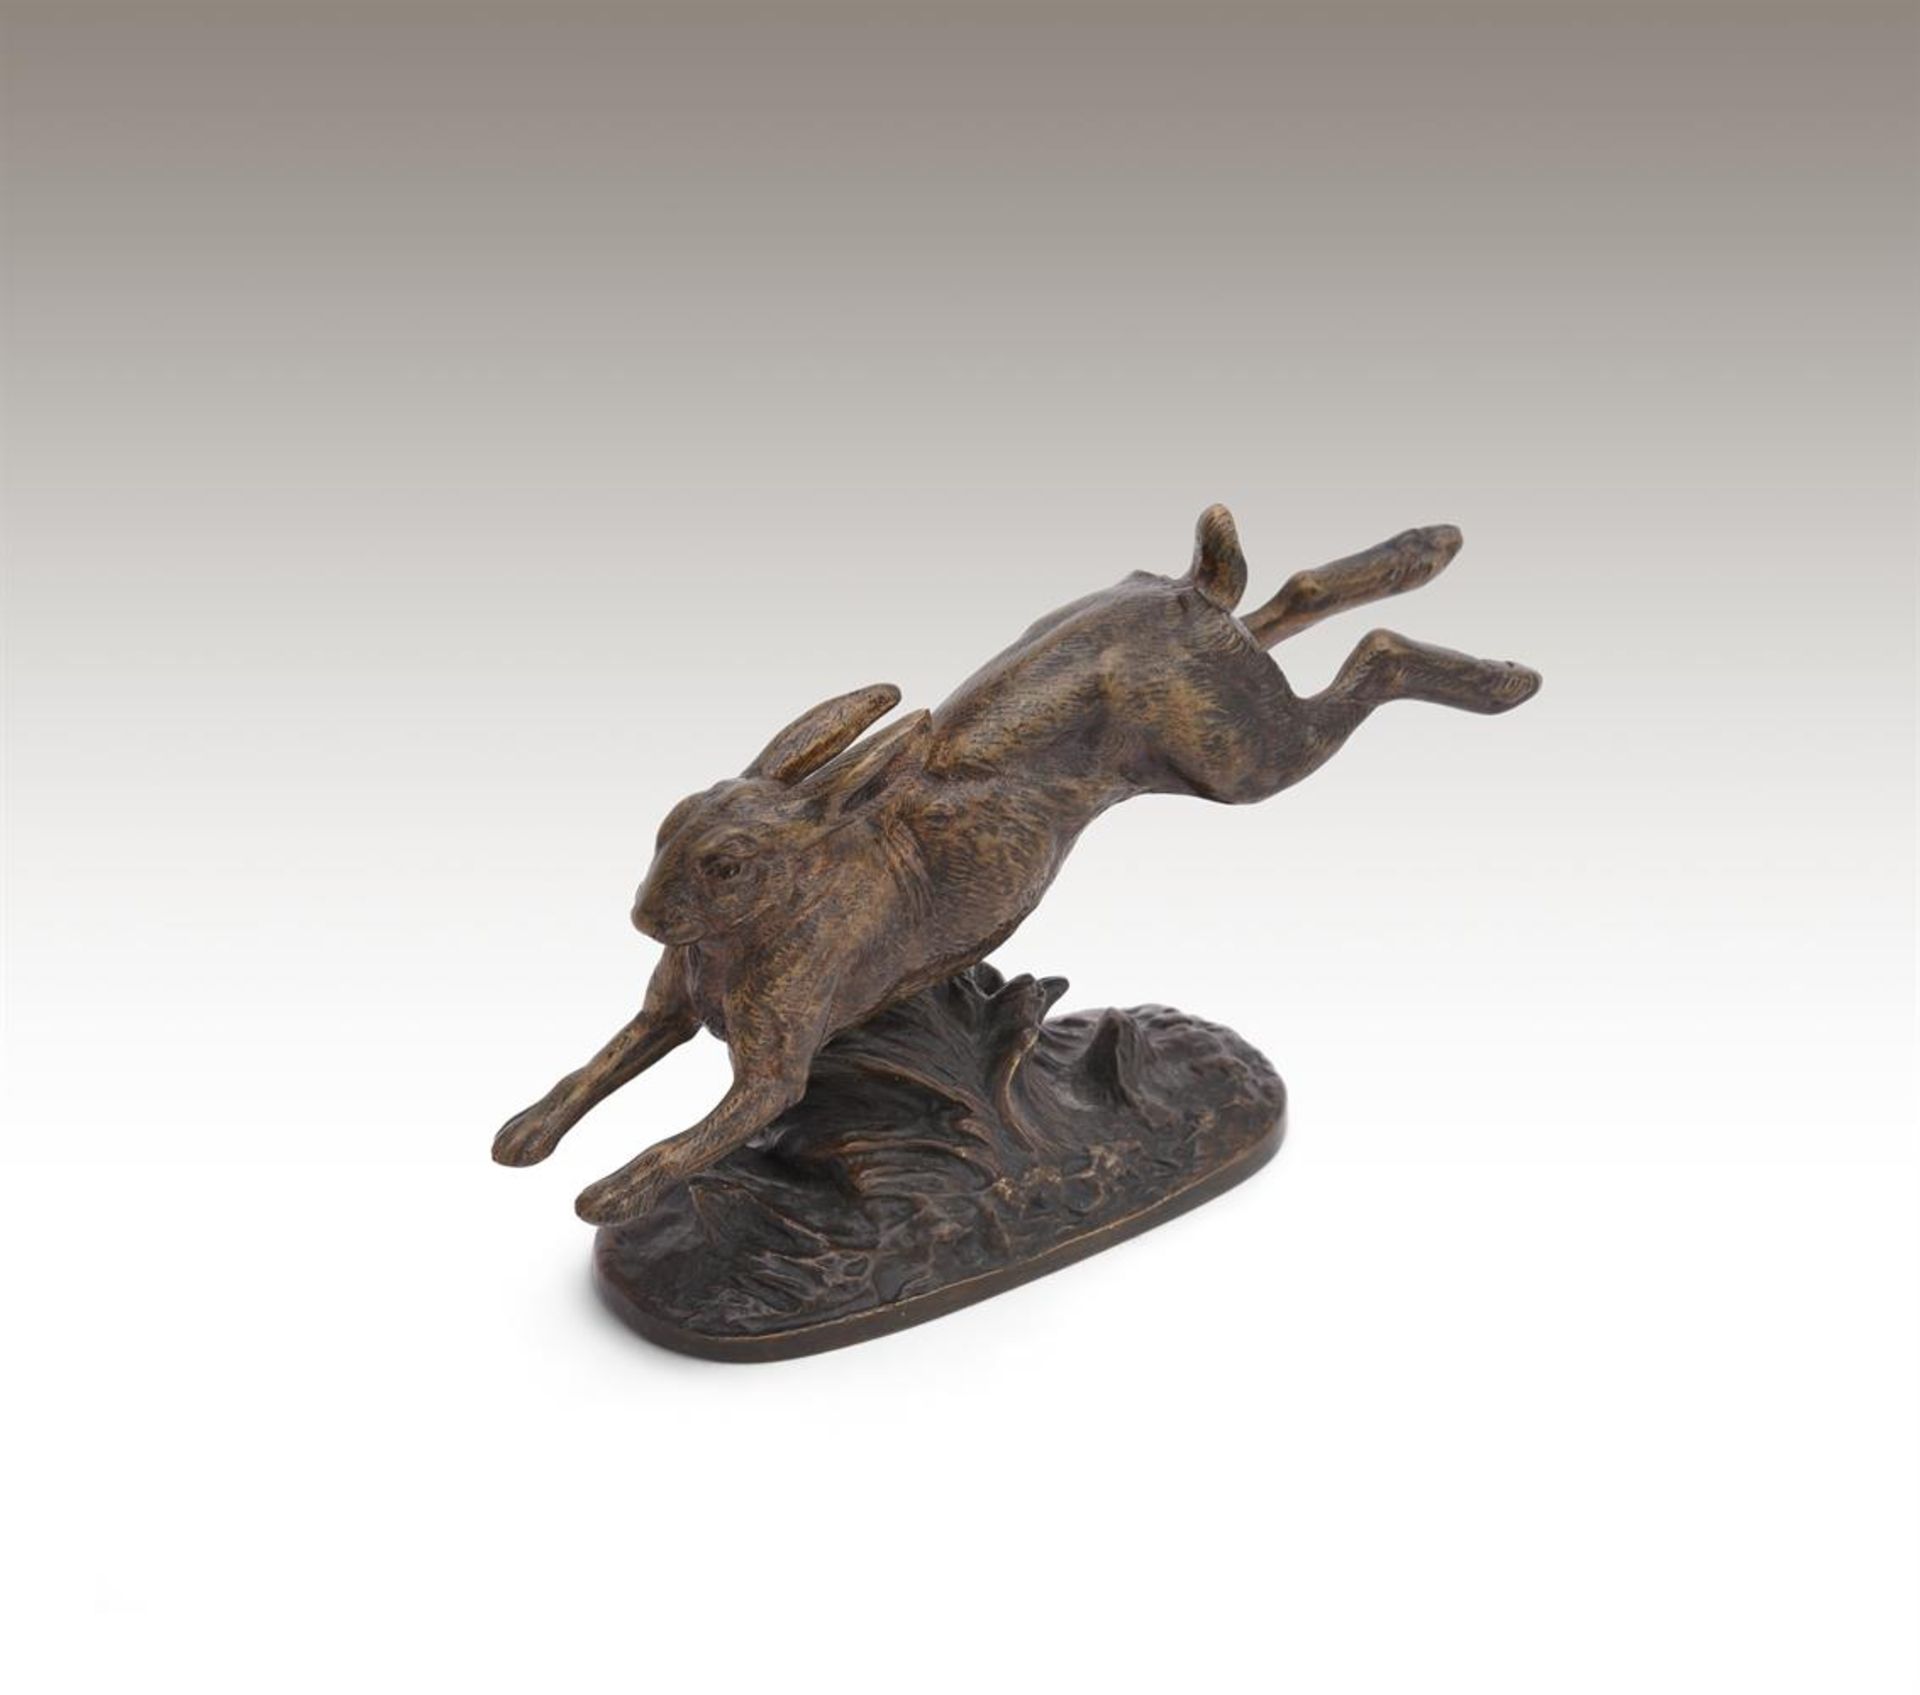 JULES-EDMOND MASSON (FRENCH, 1871-1932)), A BRONZE MODEL OF A RUNNING HARE - Image 4 of 4